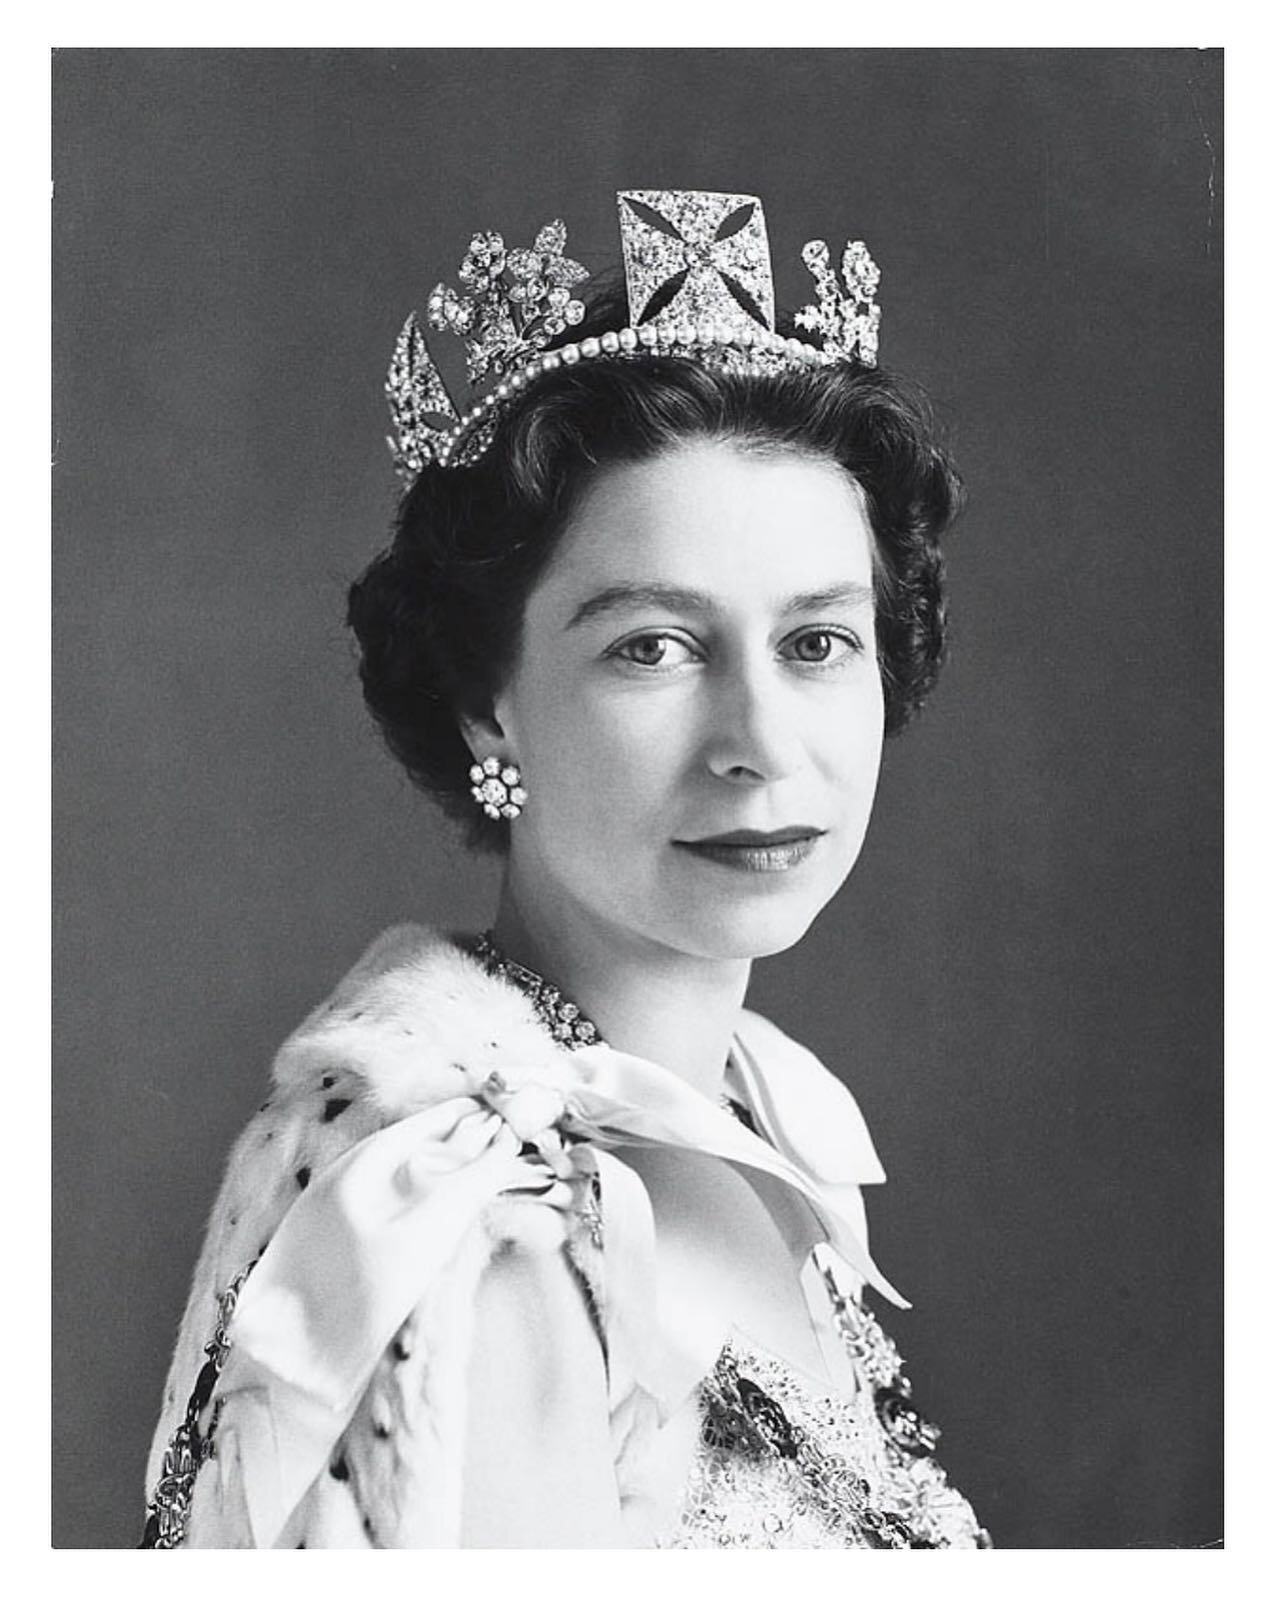 &ldquo;When life seems hard, the courageous do not lie down and accept defeat; instead, they are all the more determined to struggle for a better future.&rdquo; Queen Elizabeth II

After a lifetime of devoted service may her Majesty rest with the ang